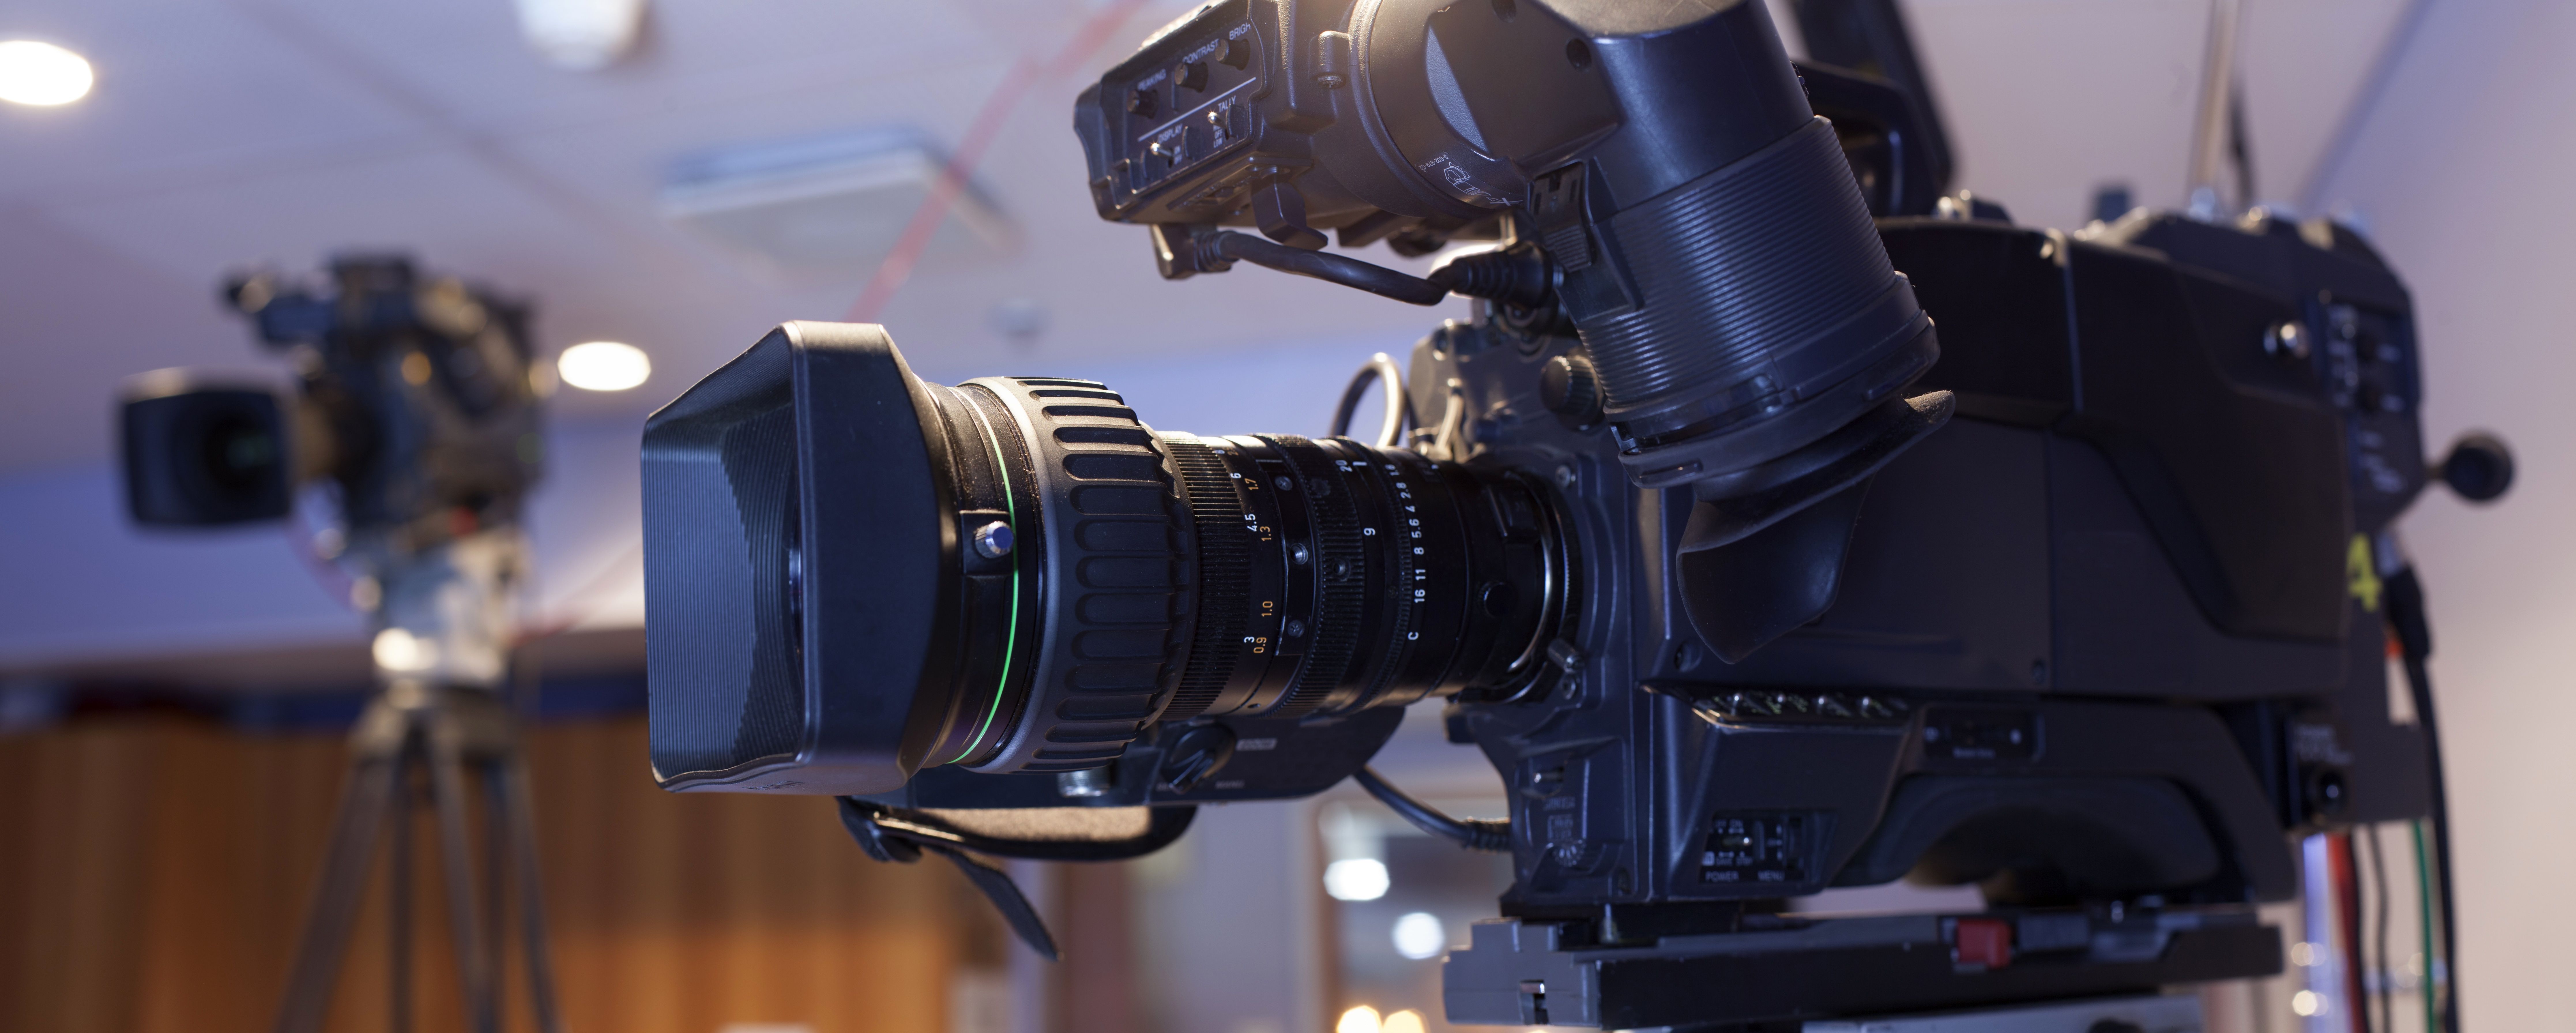 10 reasons why your business needs video